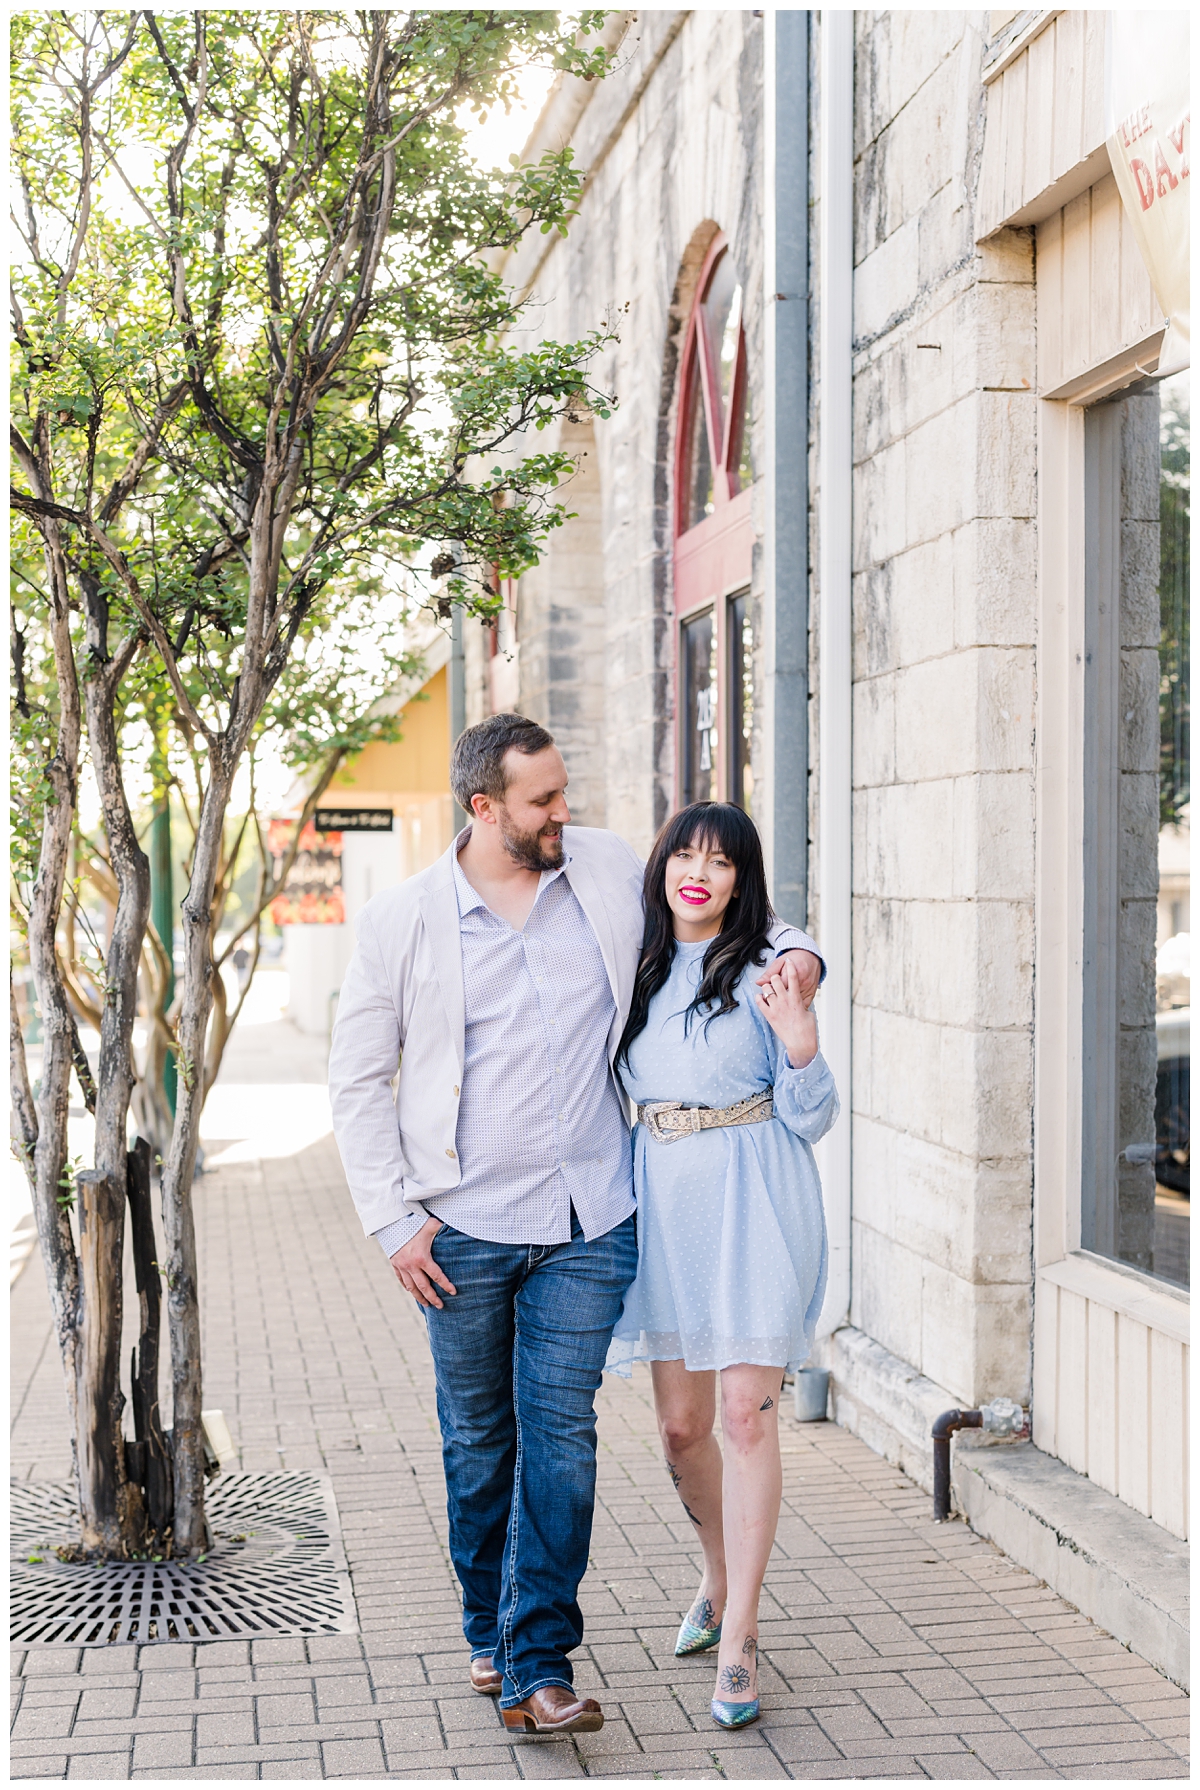 downtown Georgetown TX engagement photos